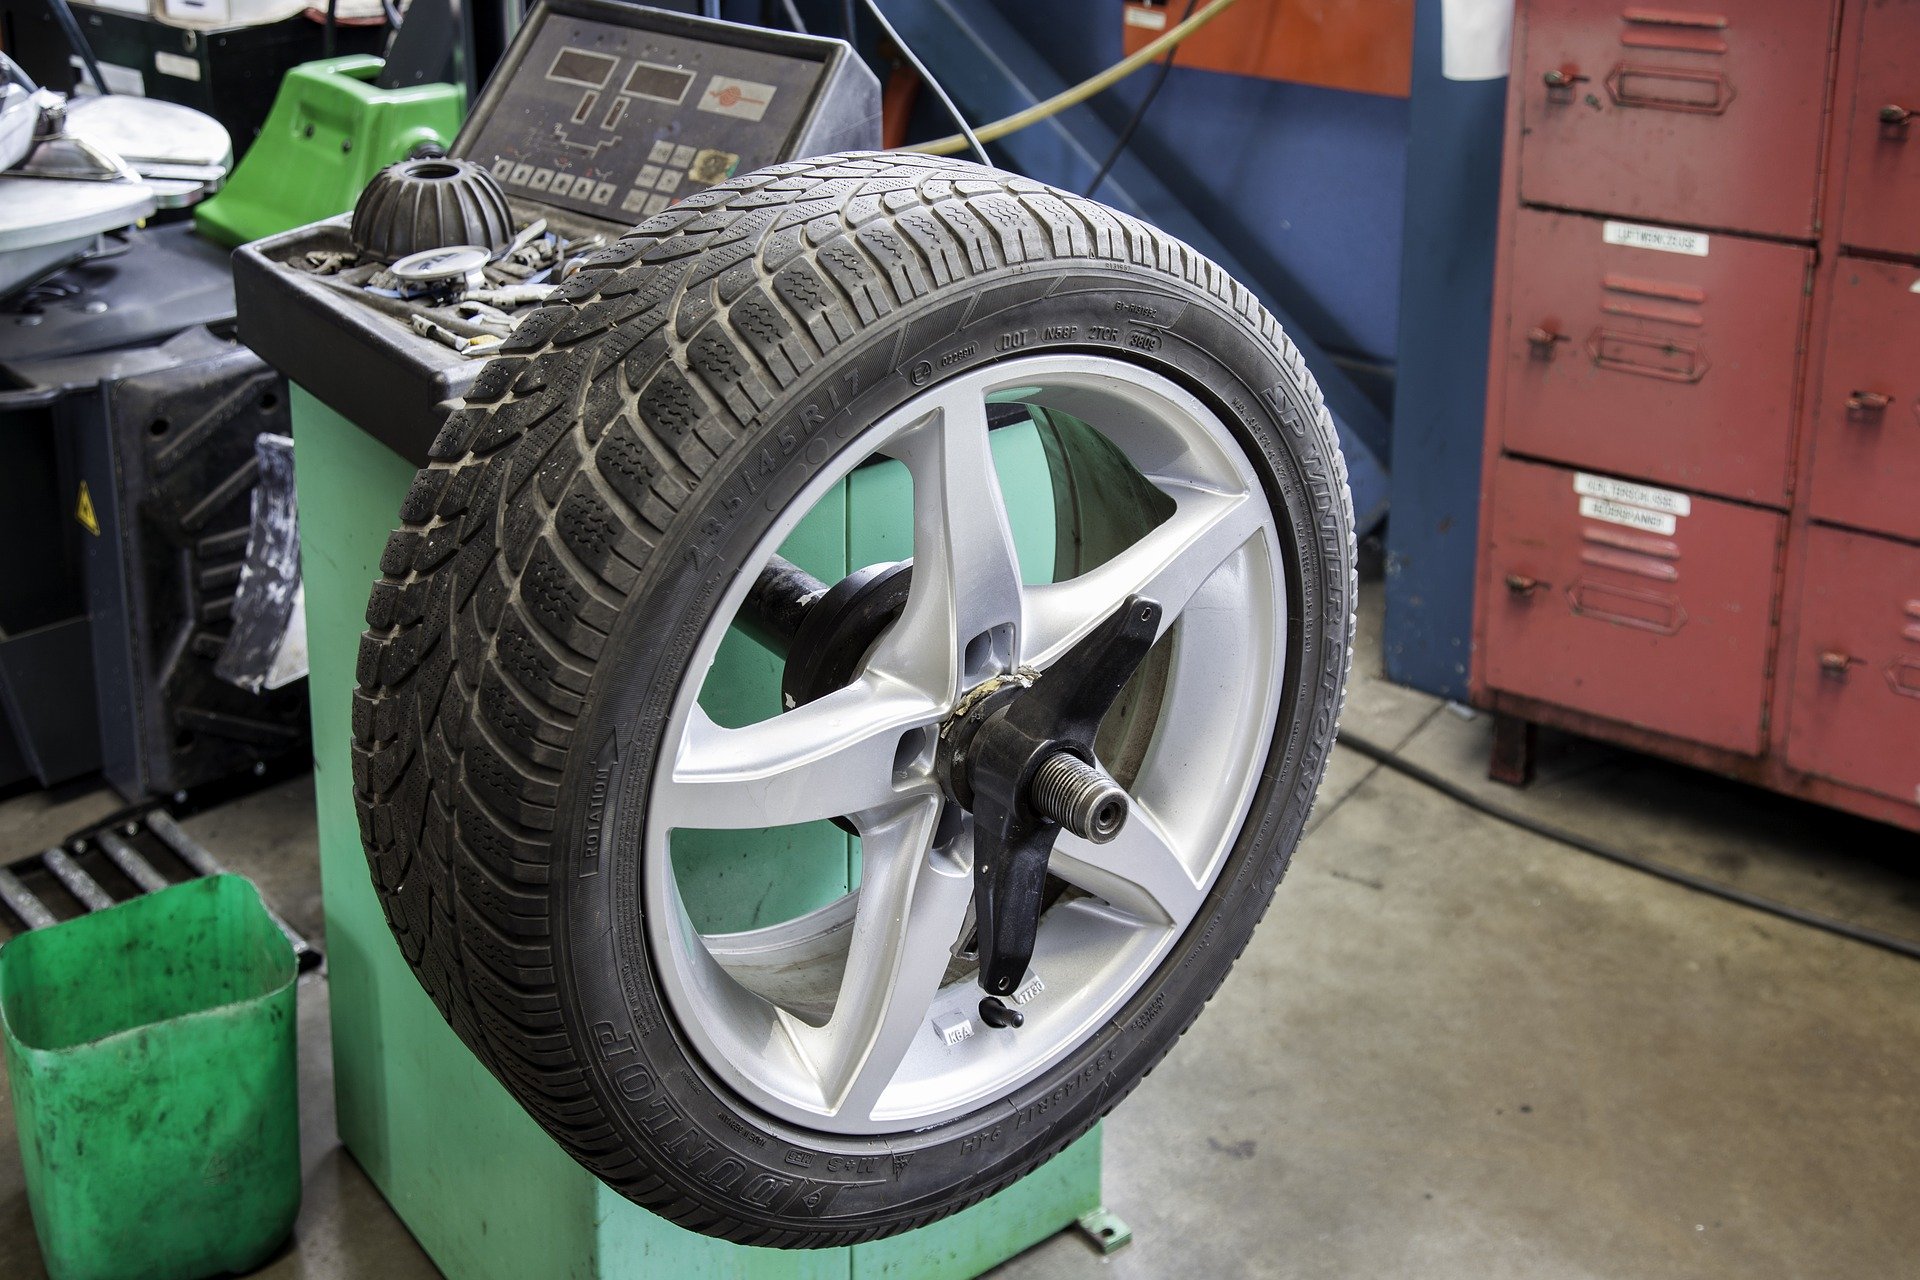 Balancing the tyres when changing wheels in the workshop